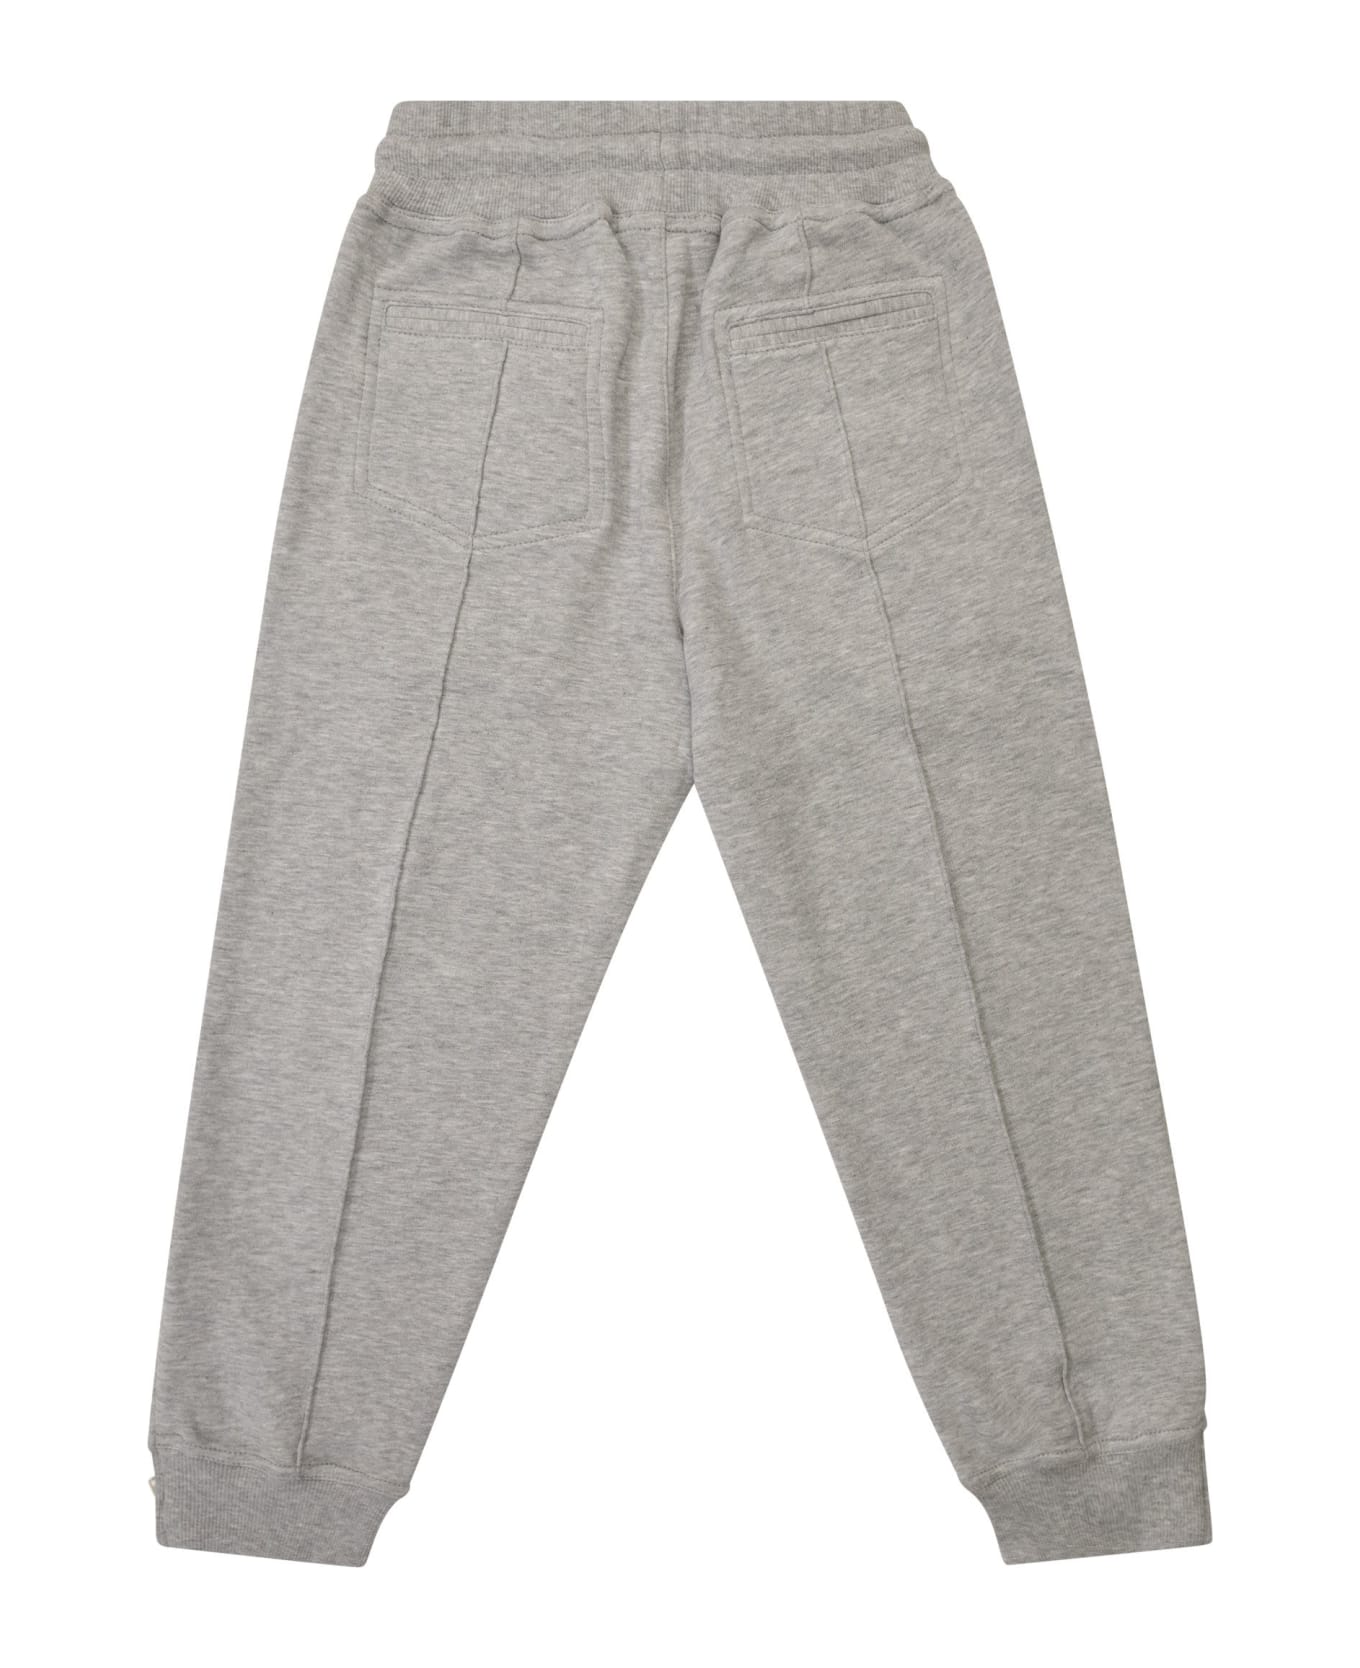 Brunello Cucinelli Techno Cotton Fleece Trousers With Crête And Elasticated Bottom With Zip - Grey